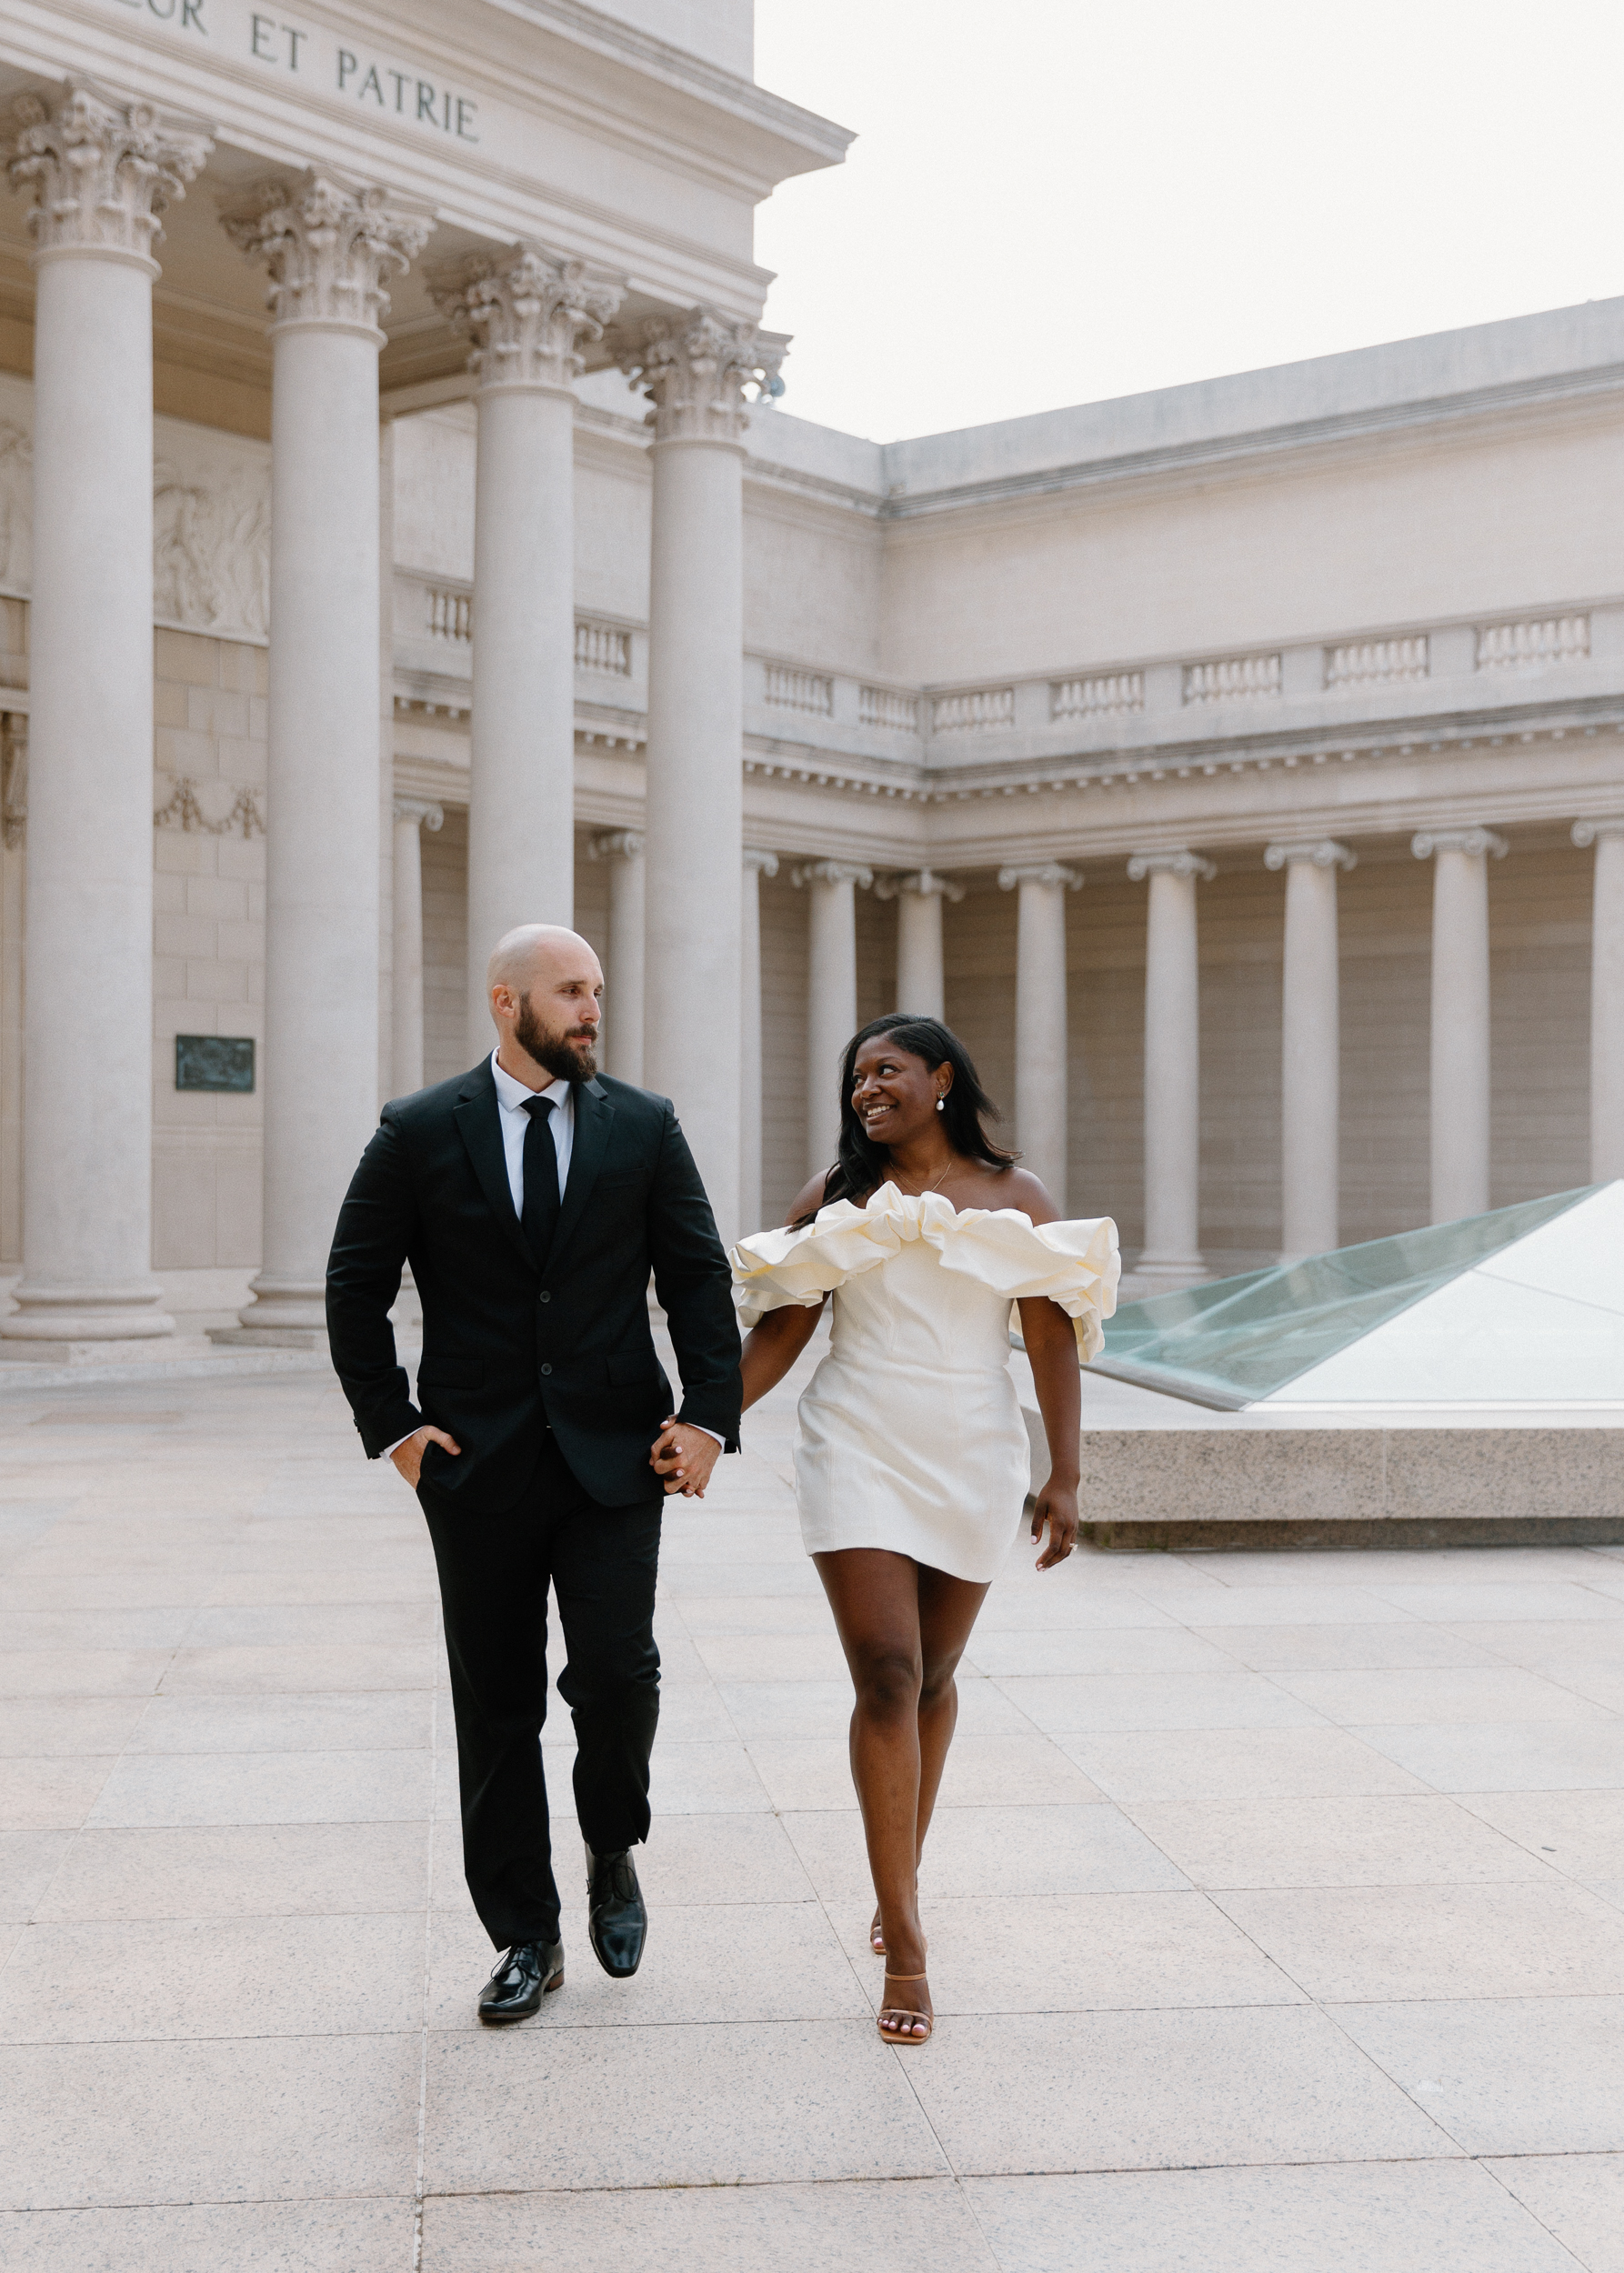 Neoclassical romance: The fog adds an air of mystery to the Legion of Honor's grand facade, providing a dreamlike backdrop for the couple's quiet exchange of vows.